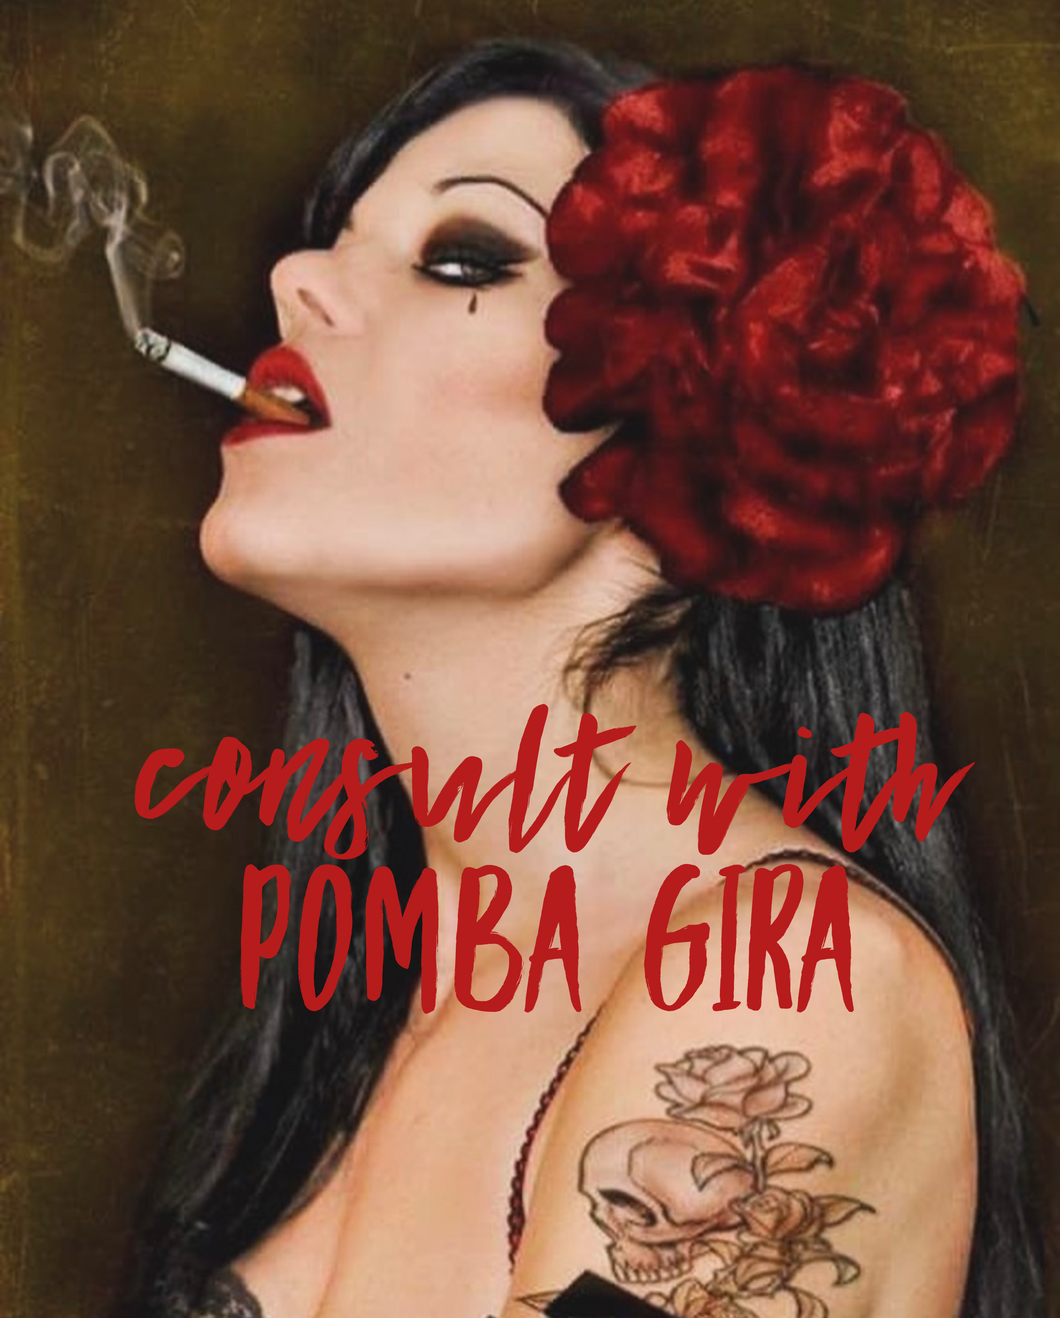 Consult with Pomba Gira (1hr)